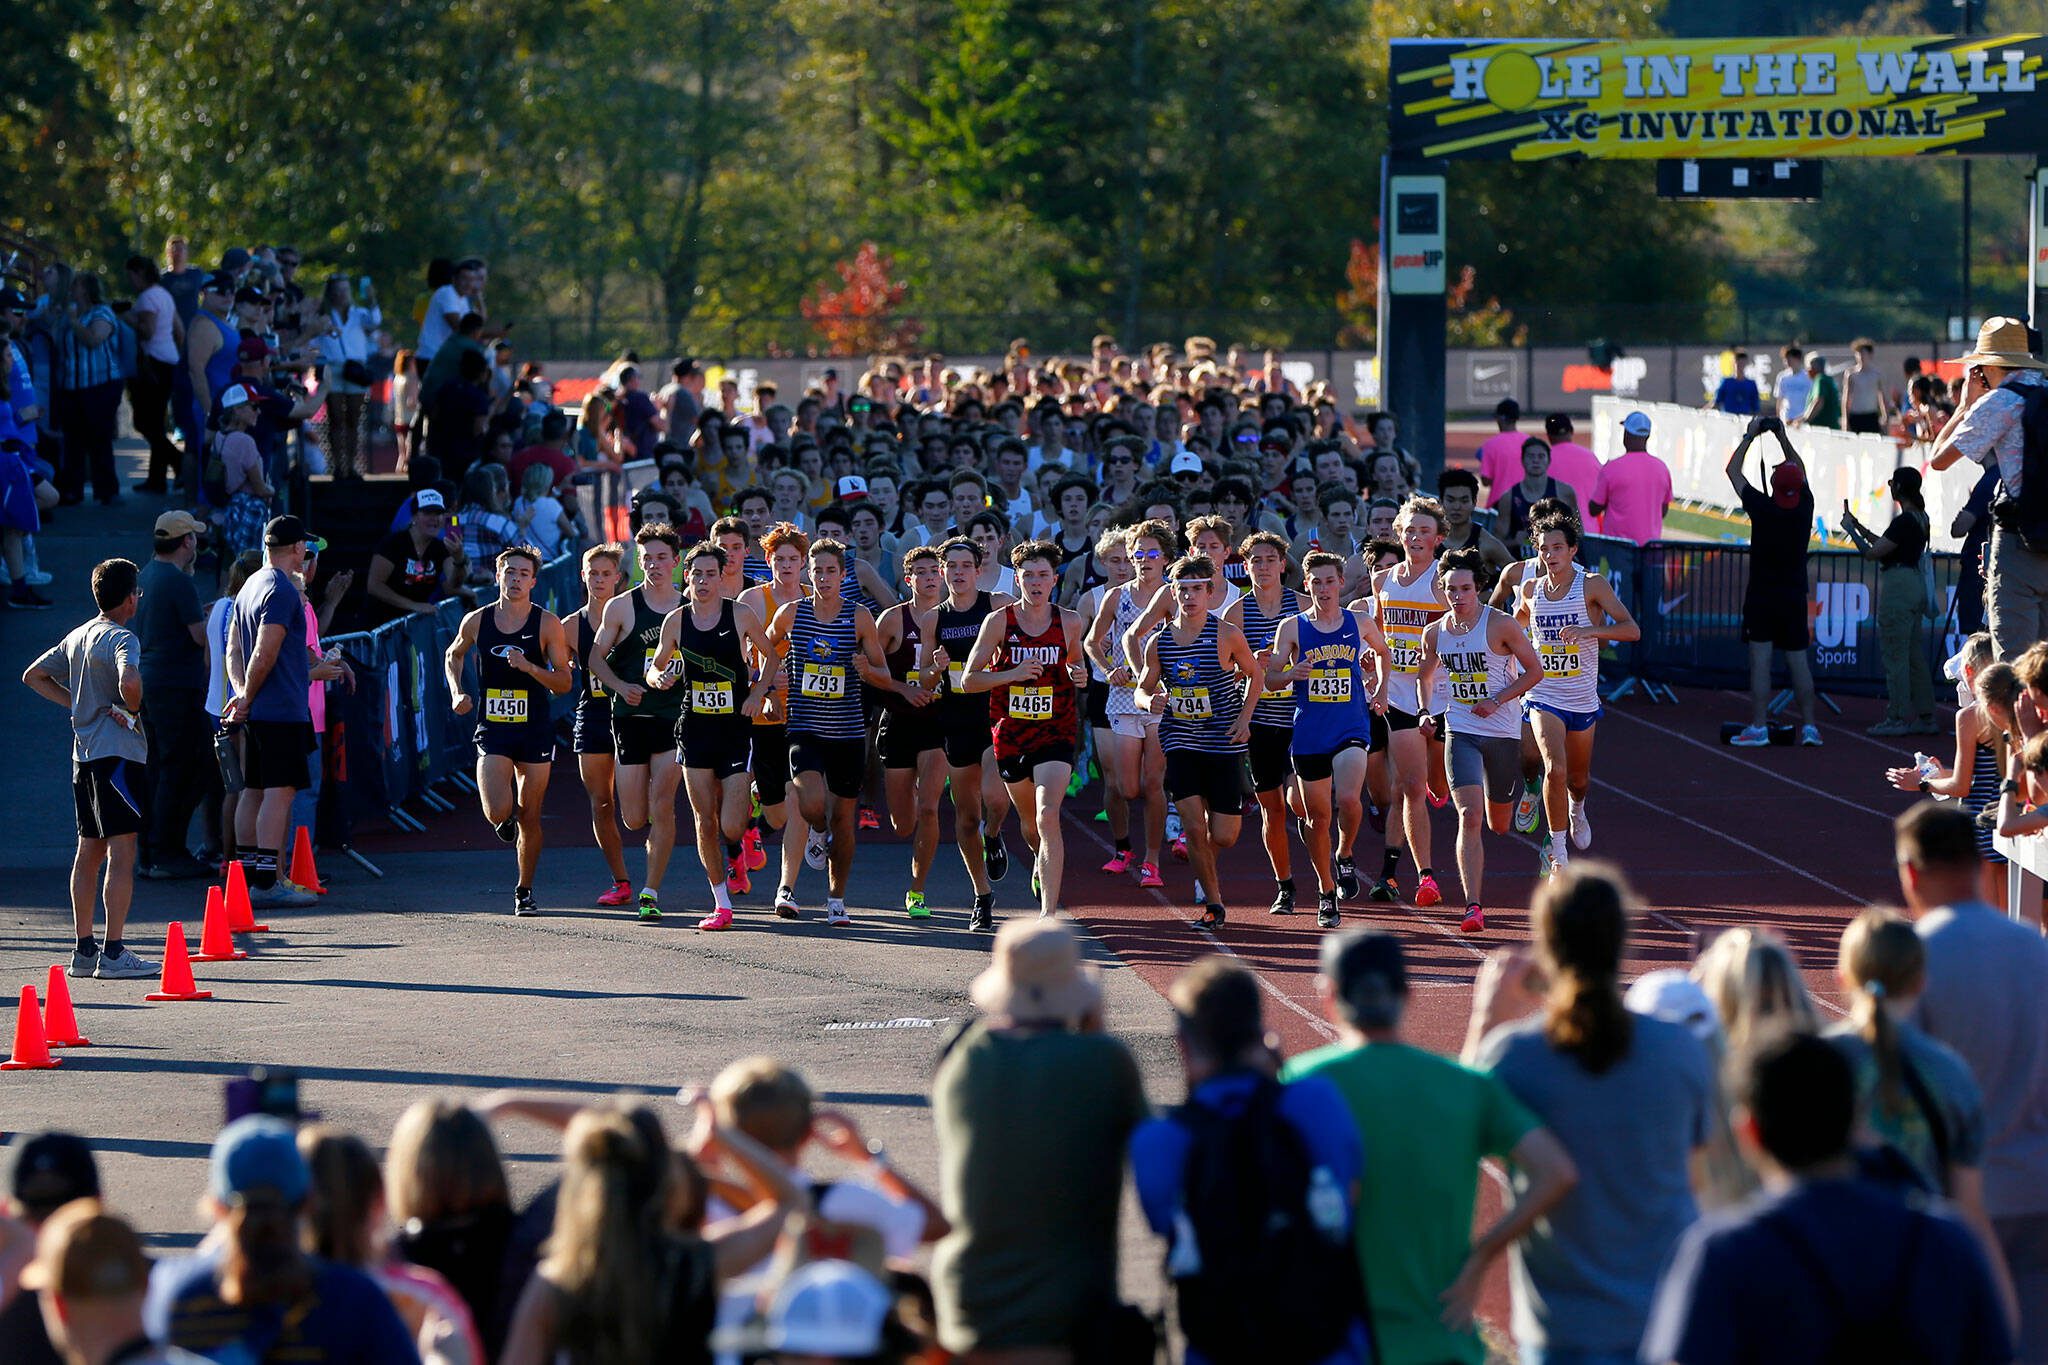 The pack stays together during the early portion of the Men’s Elite run during the Hole in the Wall Cross Country Invitational on Saturday, Oct. 7, 2023, at Lakewood High School in Arlington, Washington. (Ryan Berry / The Herald)